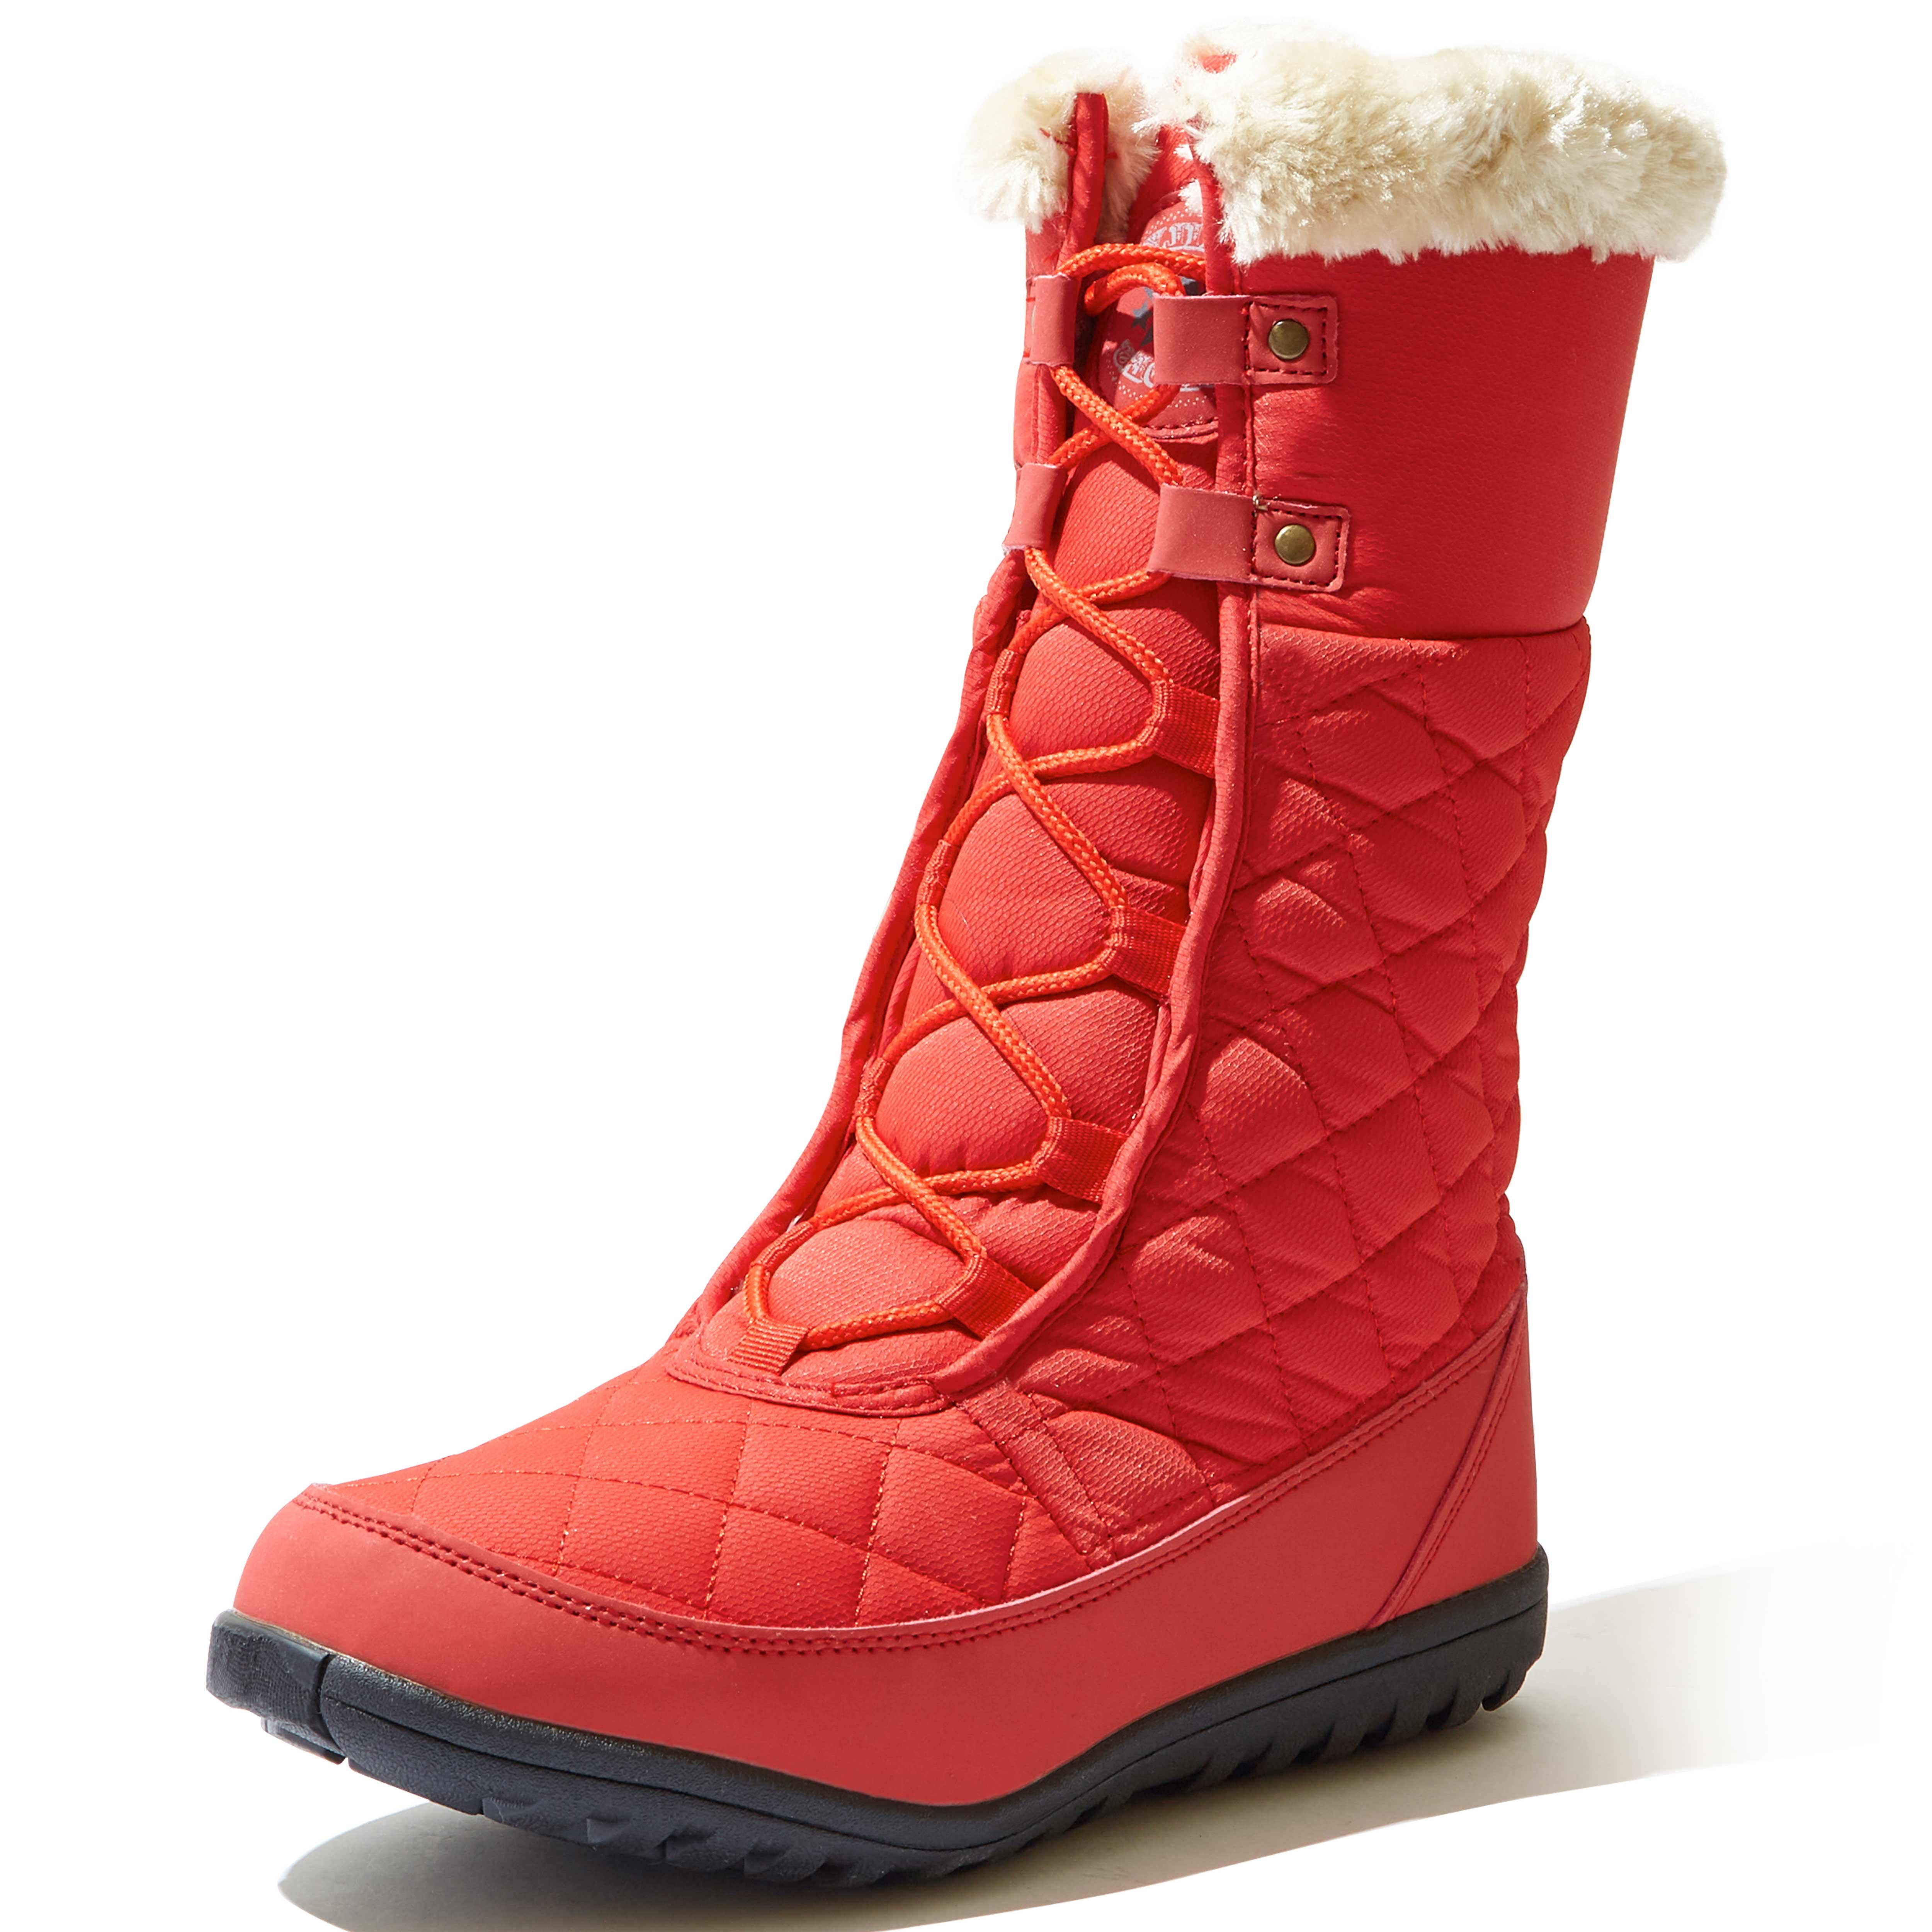 Buy > best ankle snow boots > in stock